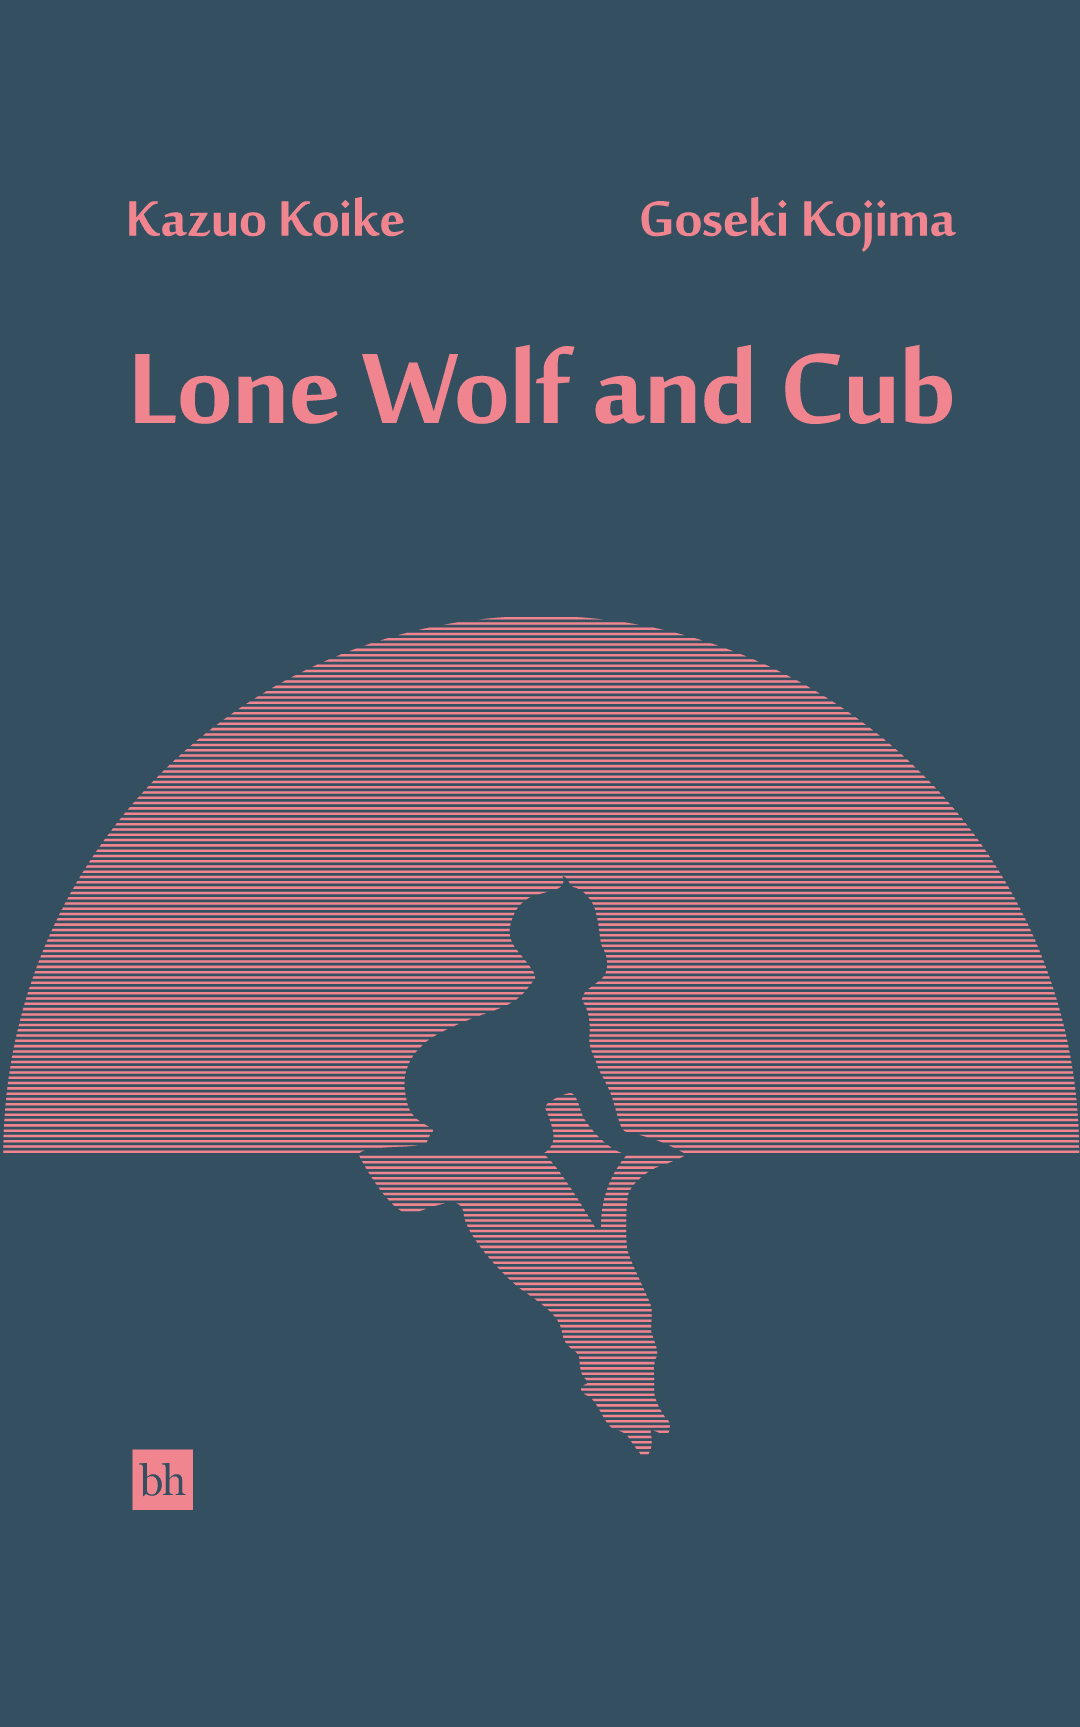 Lone Wolf and Cub by Kazuo Koike